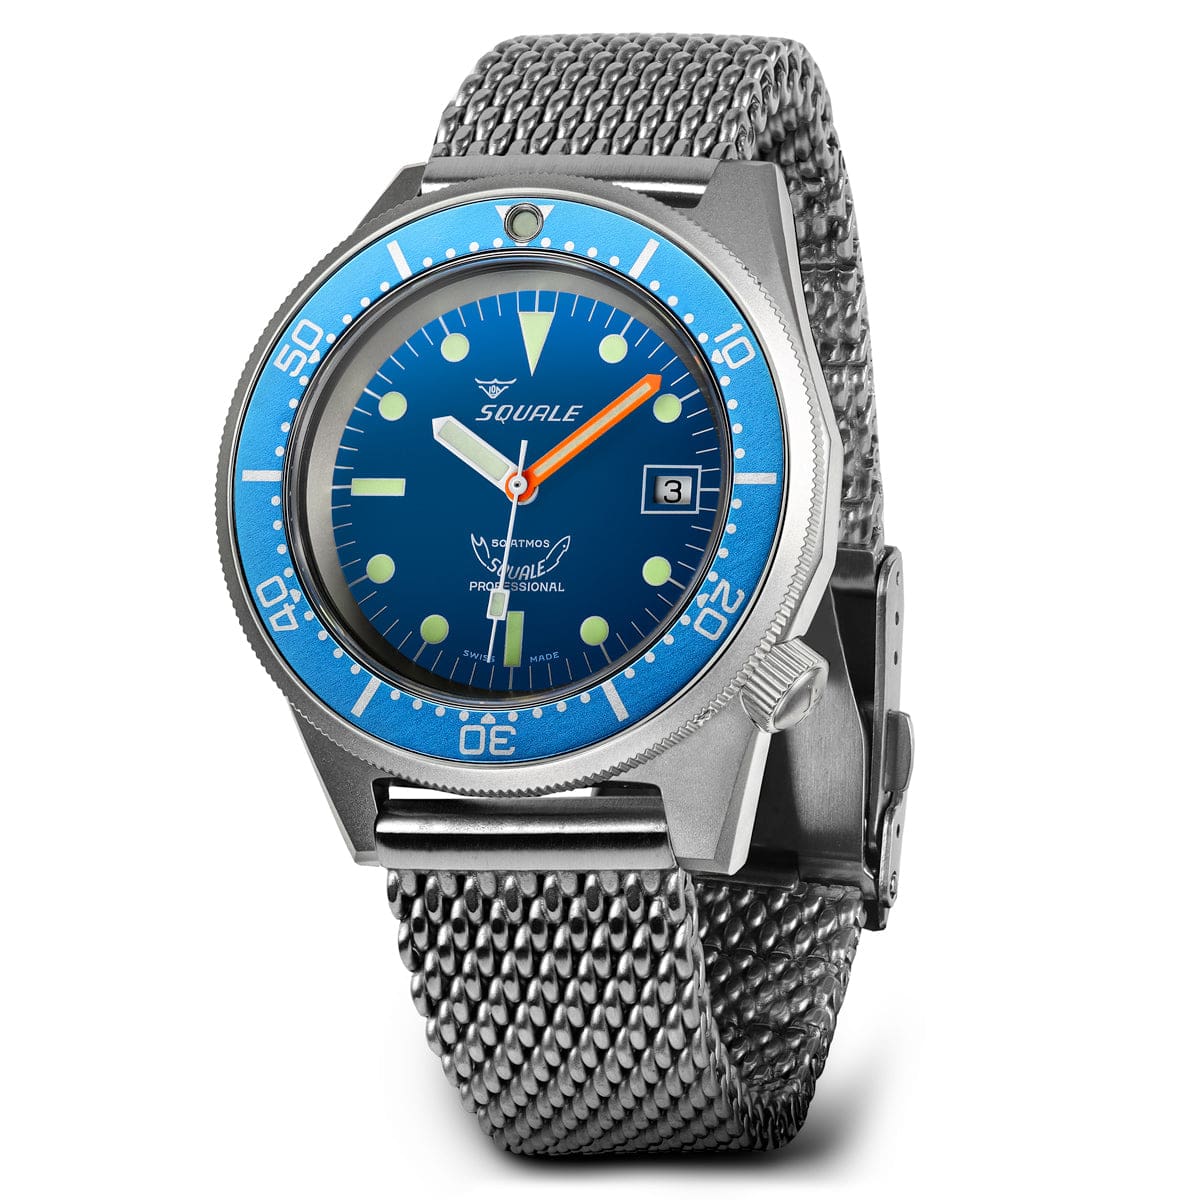 Squale 1521 Swiss Made Diver's Watch Blue Dial, Blasted Case - Mesh